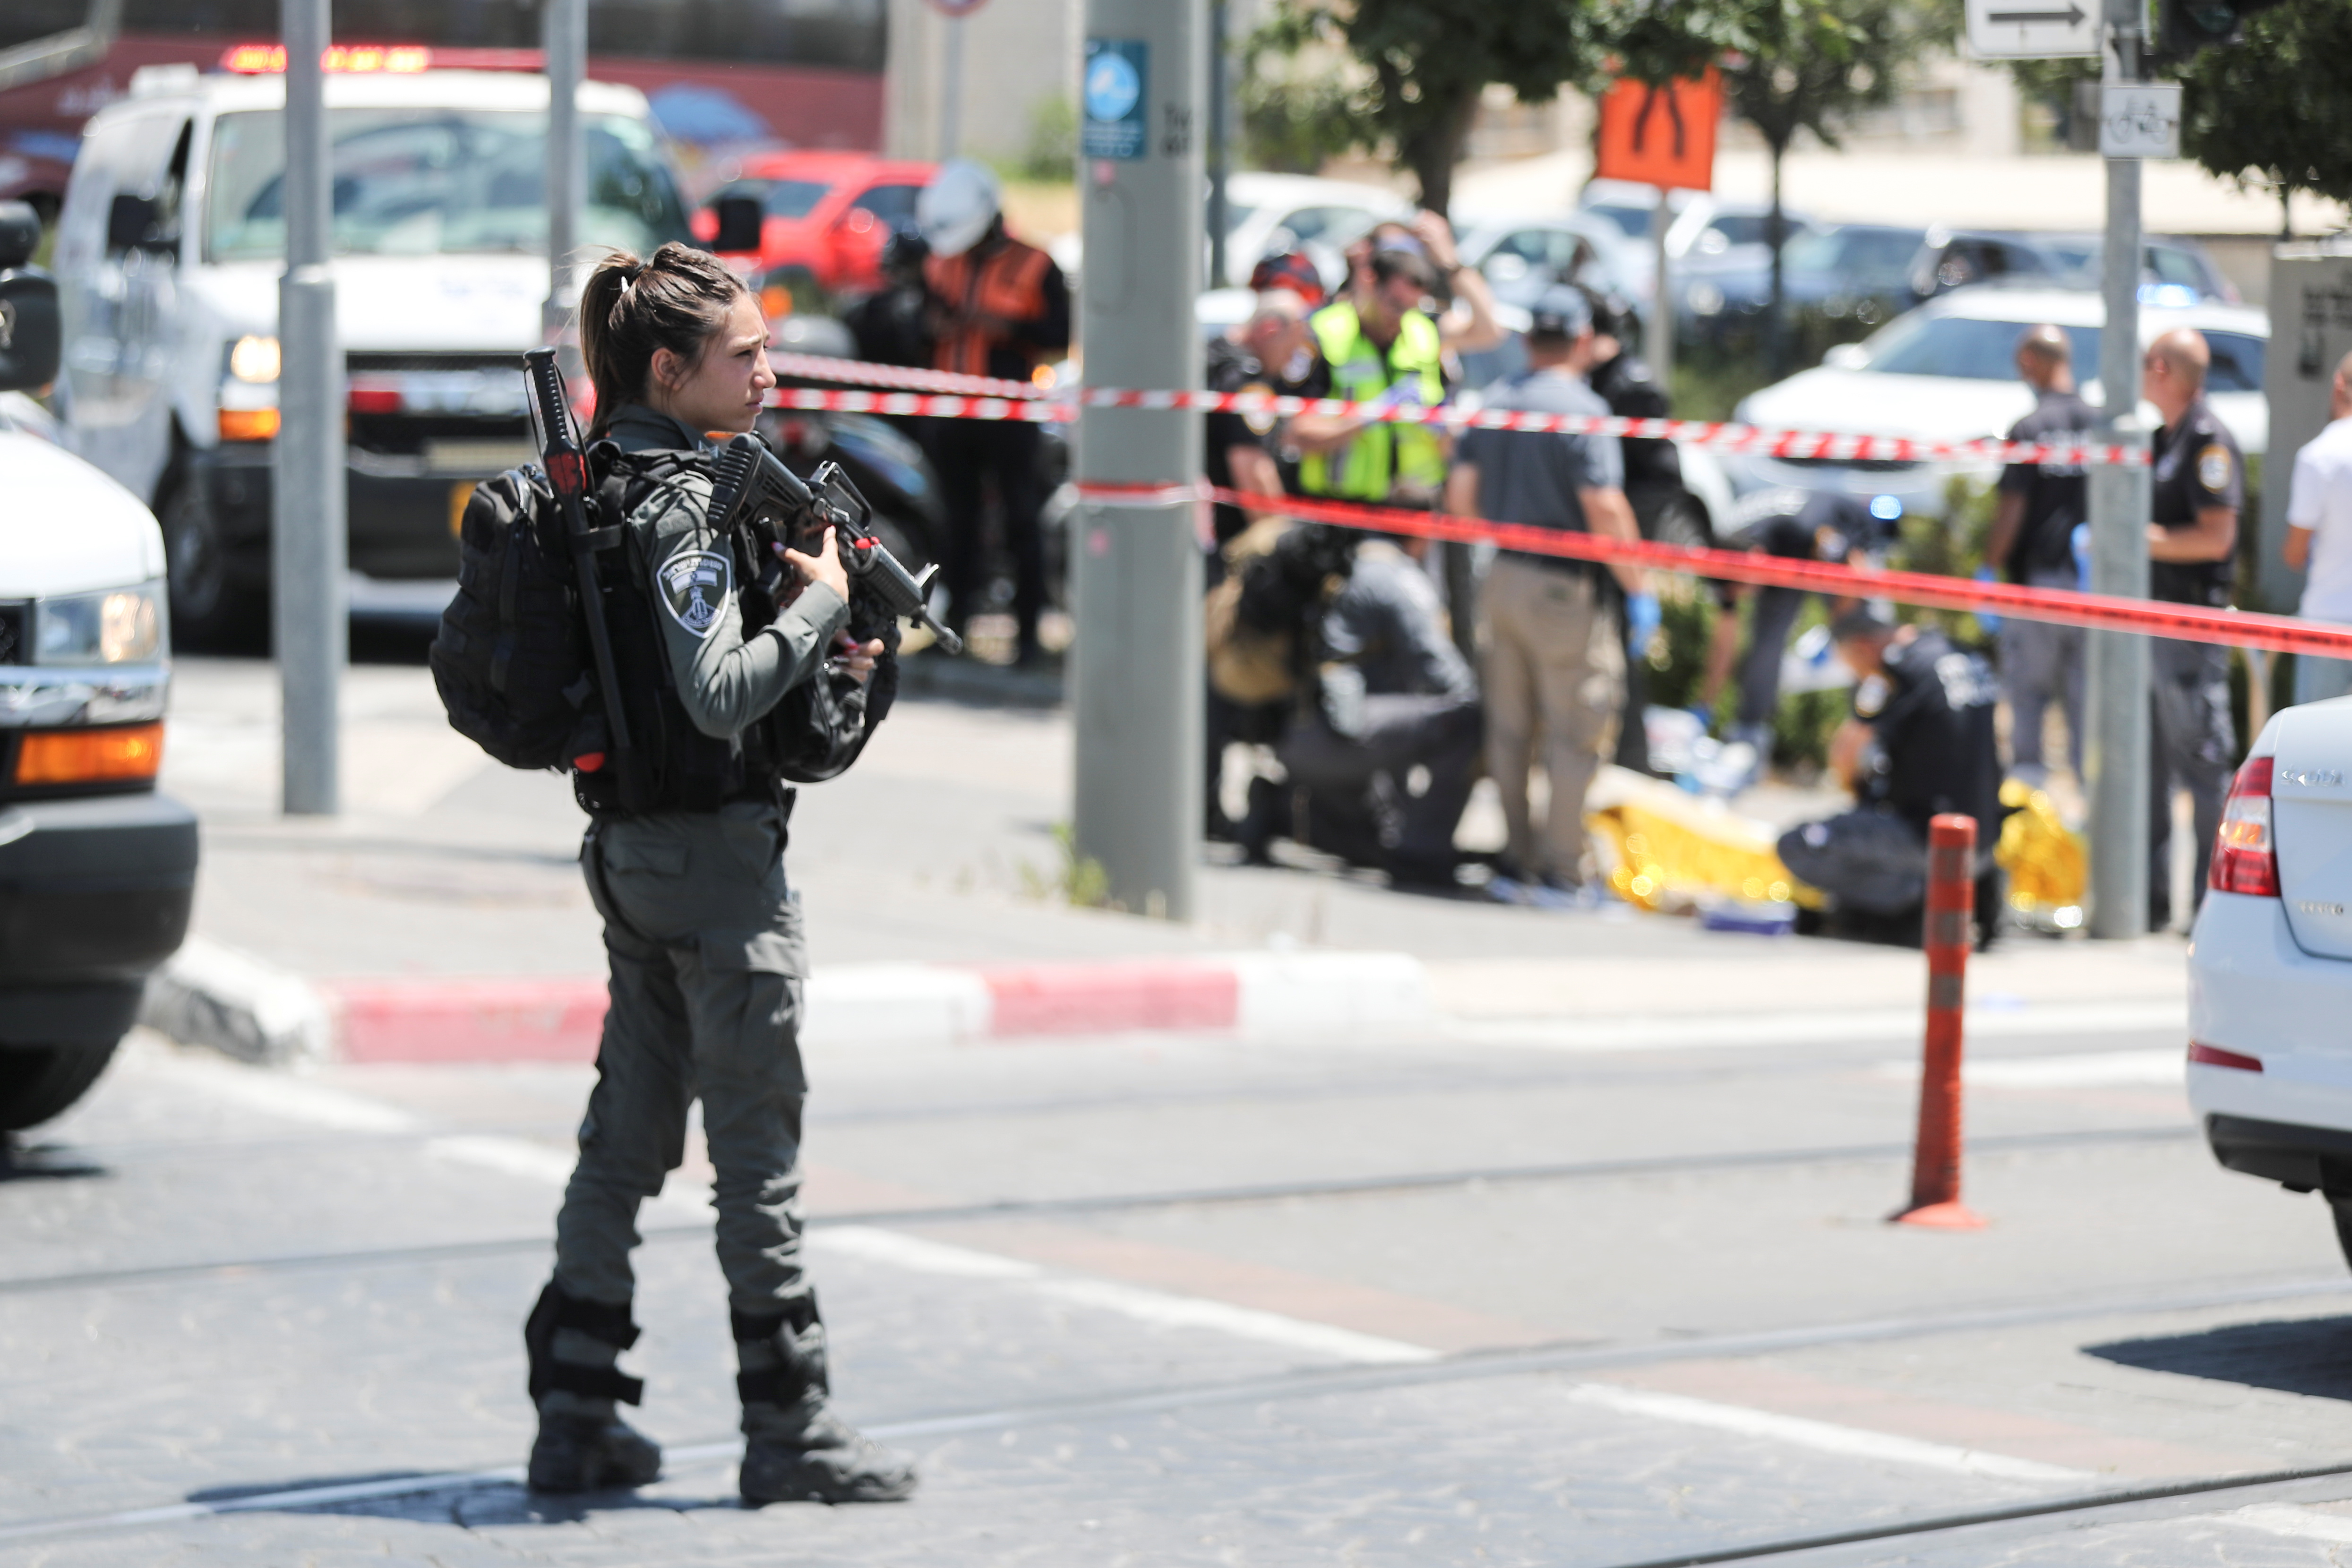 An Israeli security force member stands guard at the scene of an incident in Jerusalem